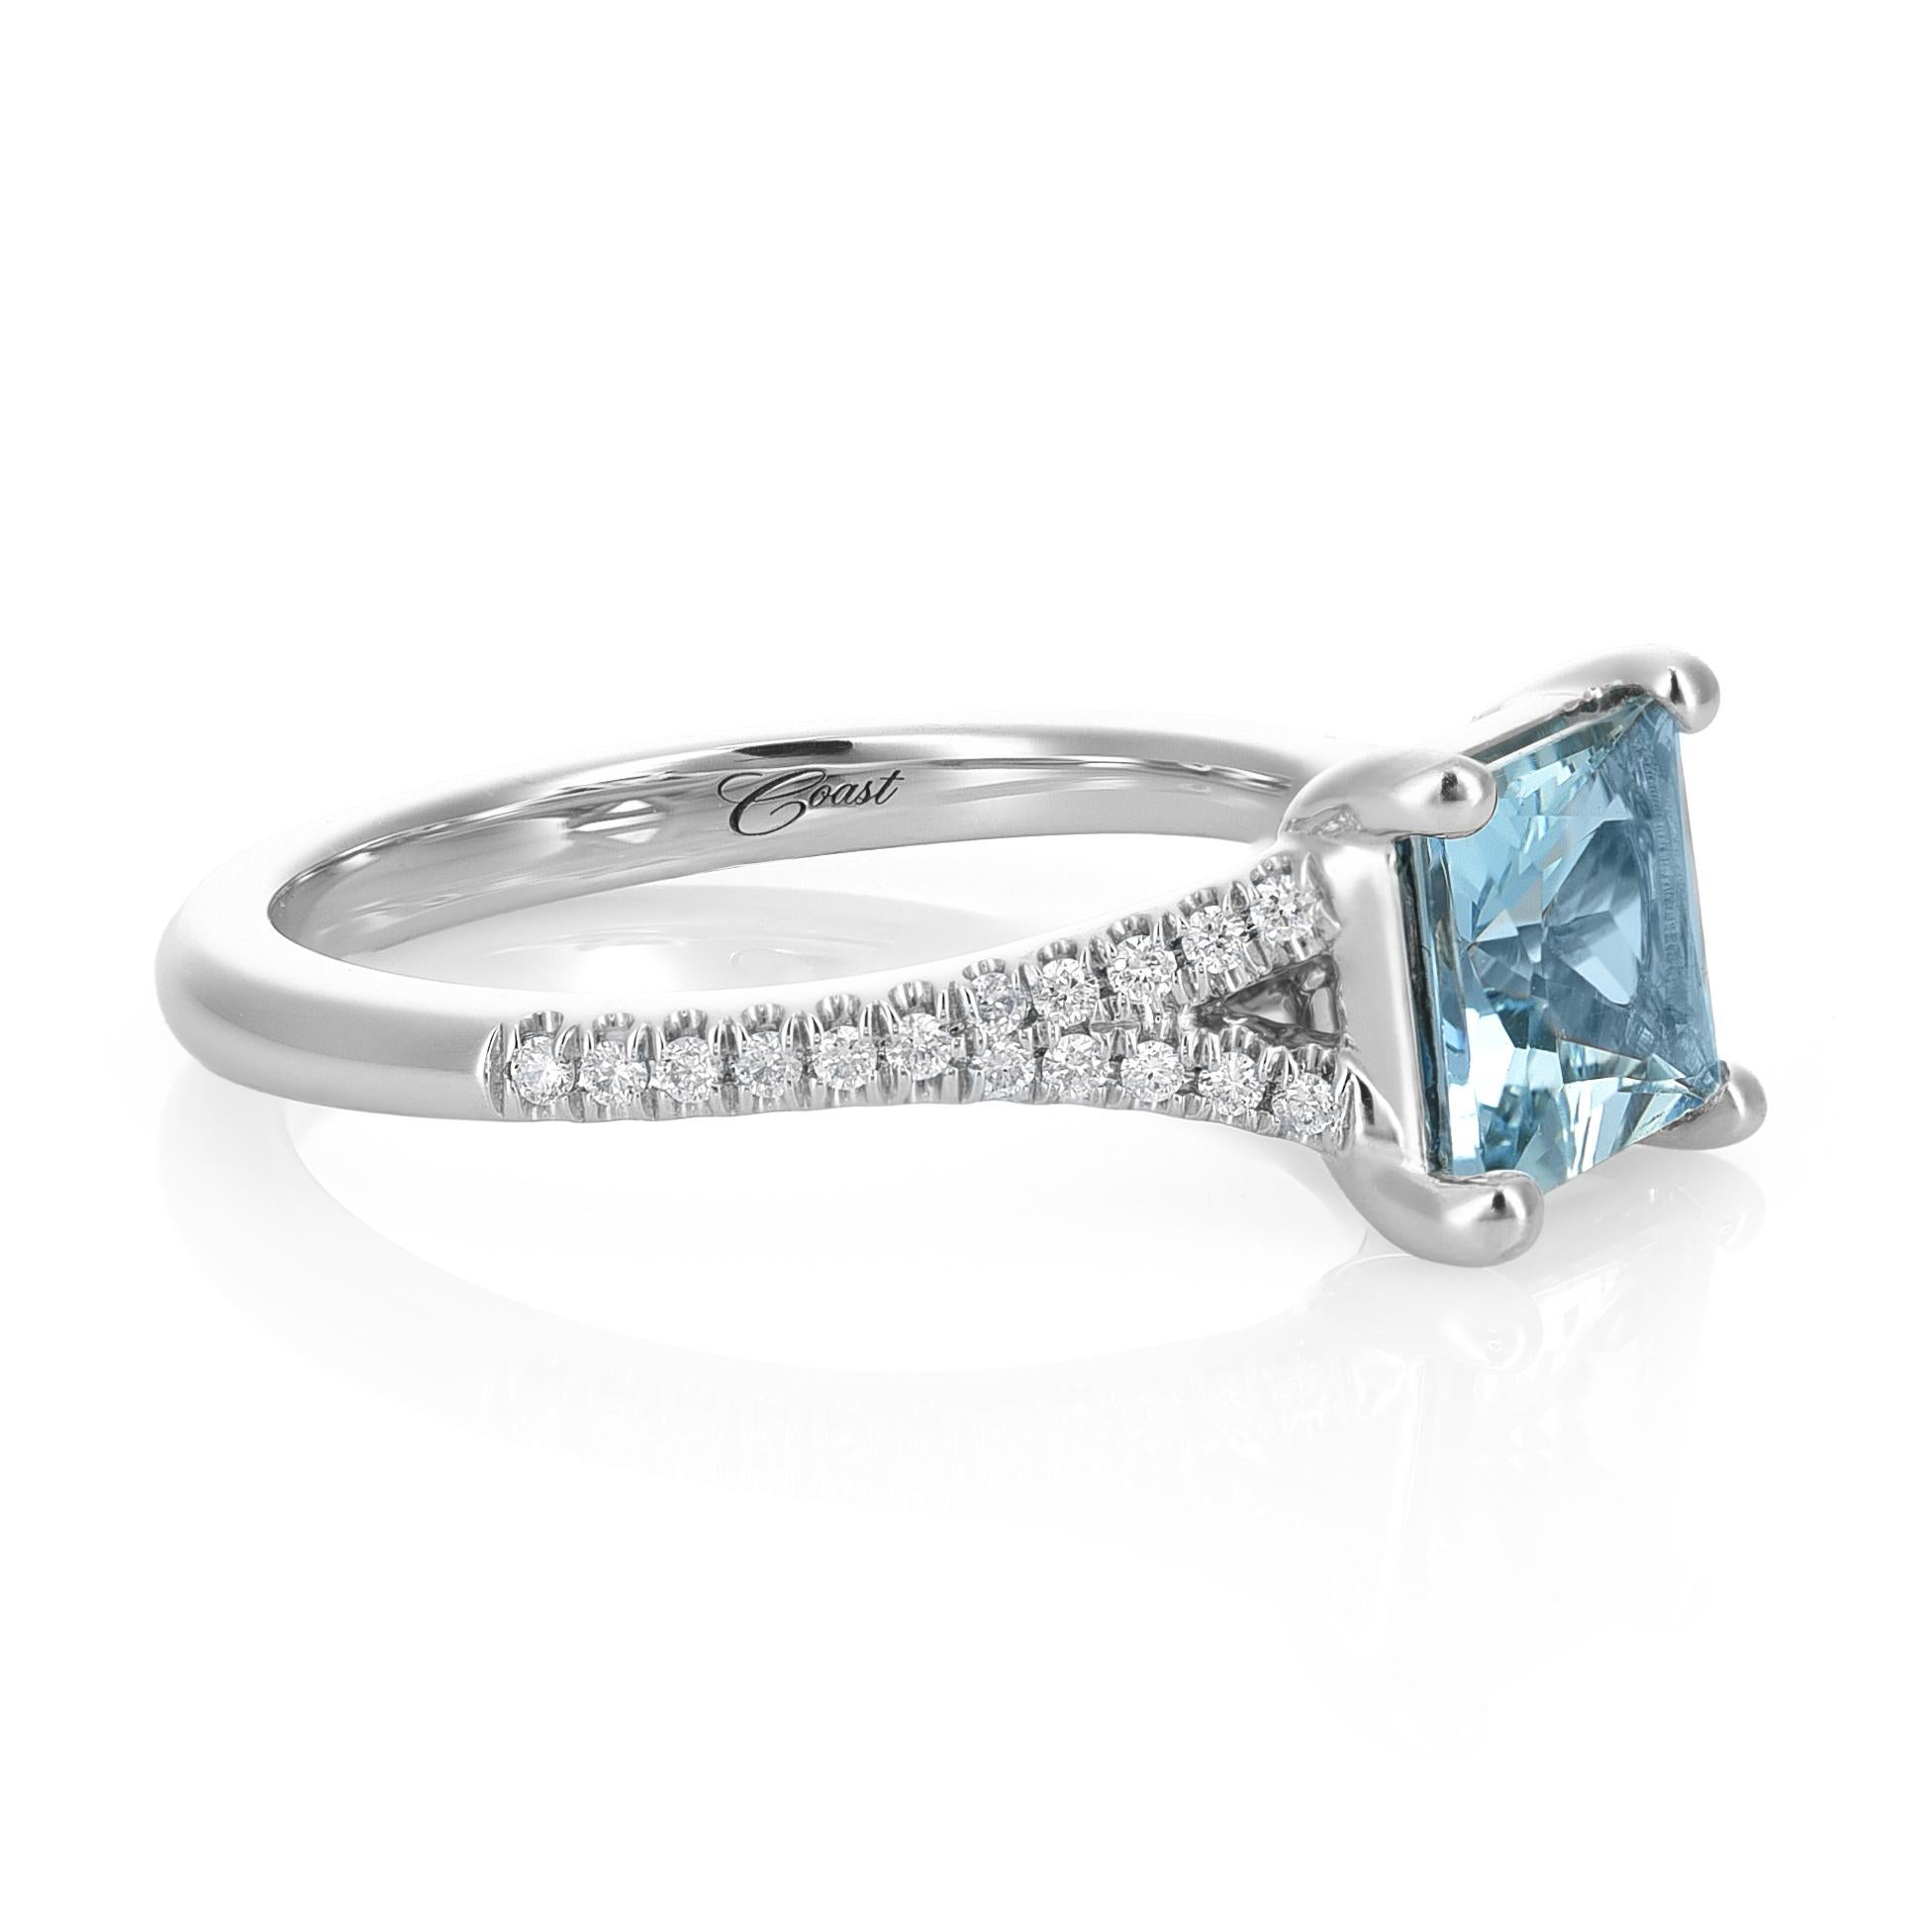 Unveiling a dazzling creation, this 14KW Gold Ring features a resplendent Natural Aquamarine of 1.45 carats. The Princess cut accentuates the inherent beauty of the Aquamarine, creating a piece that emanates elegance. The gem has been expertly